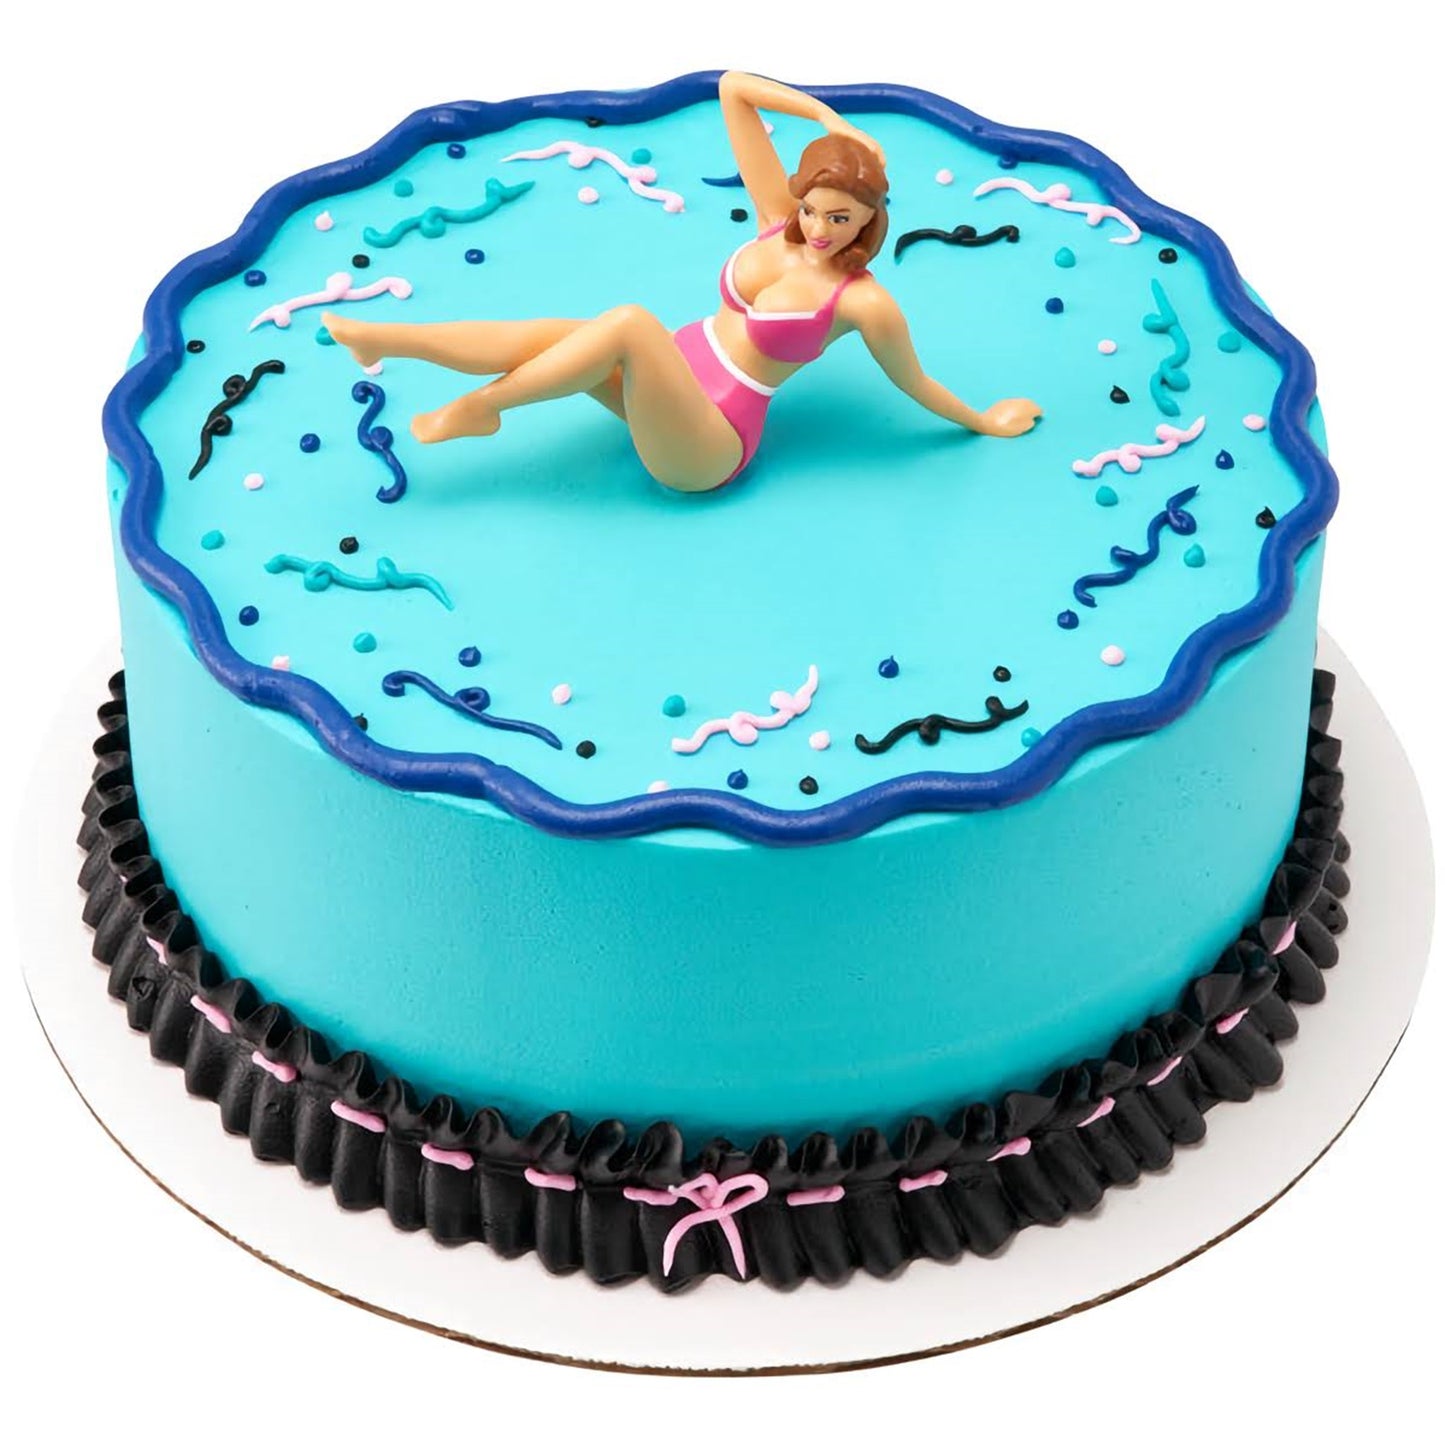 A vibrant blue cake topped with a bikini-clad woman topper, featuring playful black and pink squiggle decorations and a wavy border. This lively and eye-catching cake from Lynn's Cake, Candy, and Chocolate Supplies is sure to be the talk of any adult party or summer bash.